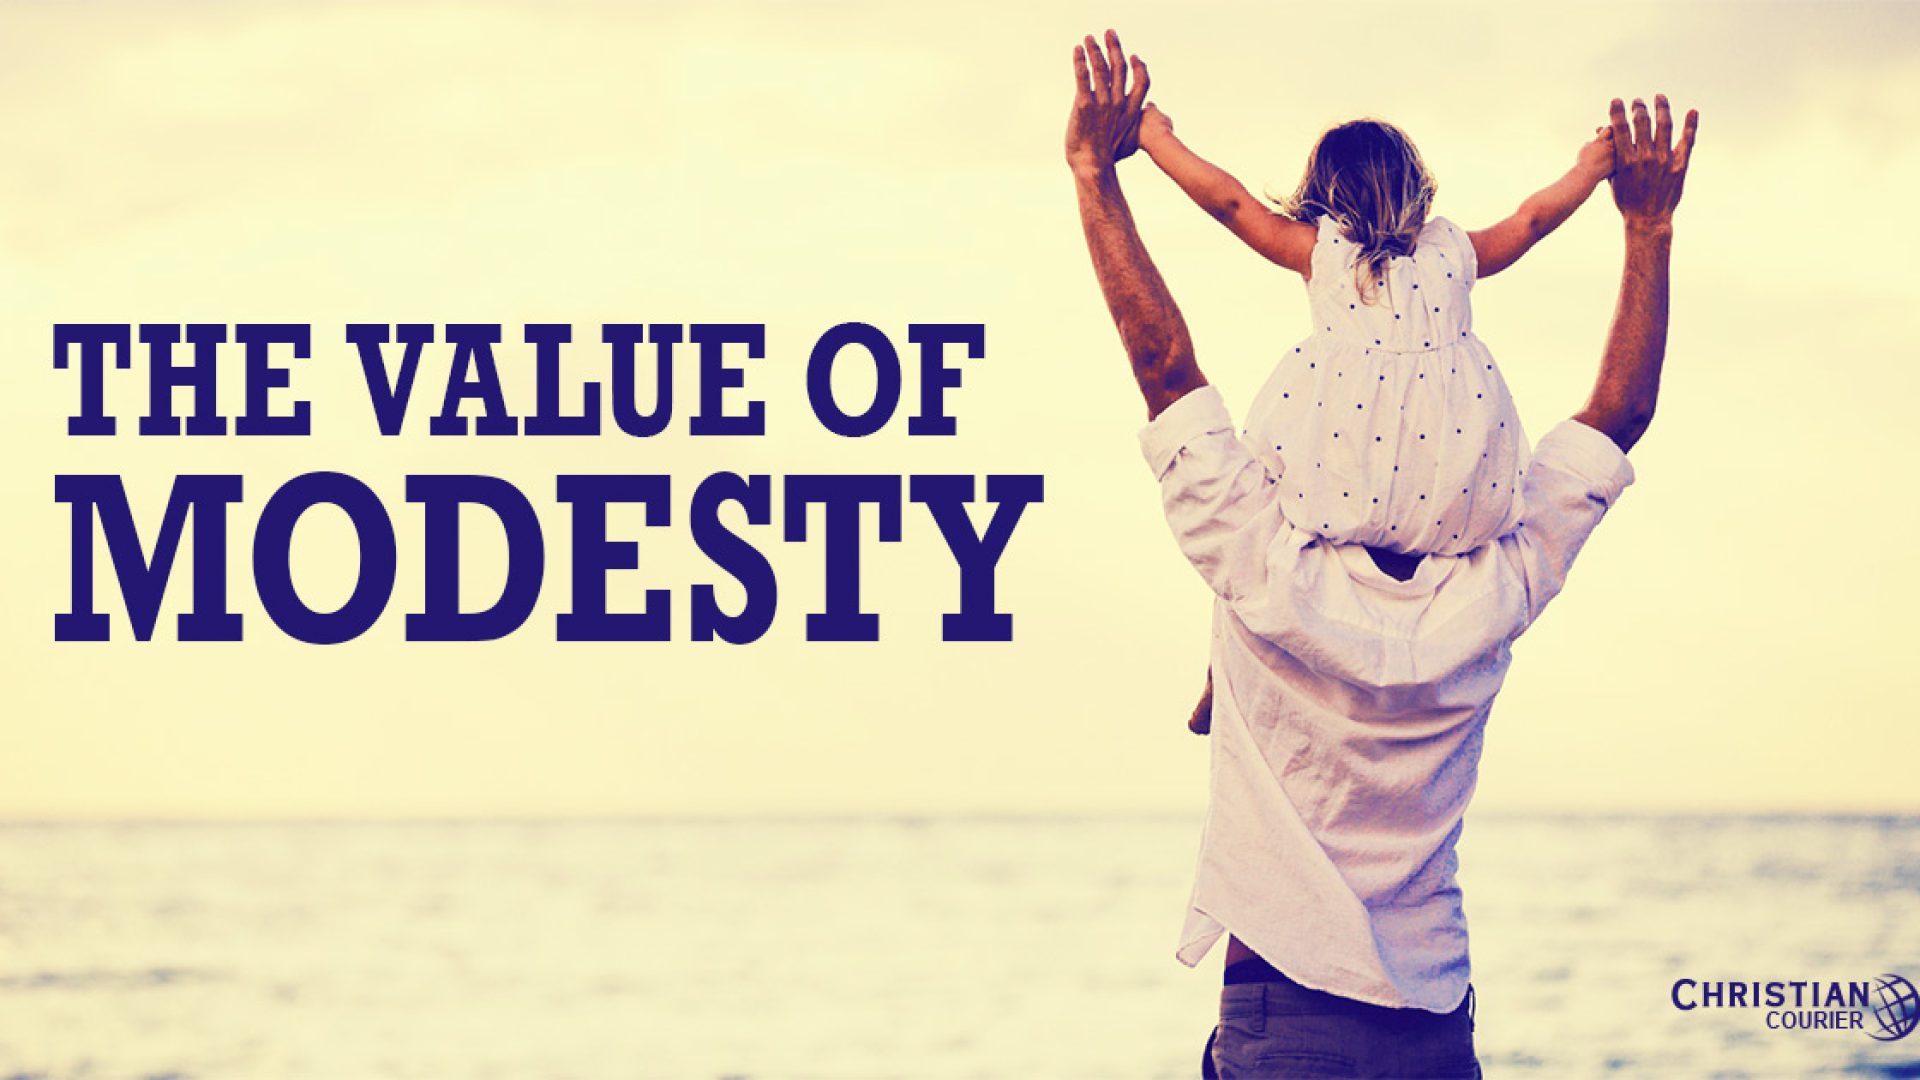 The valuo of Modesty